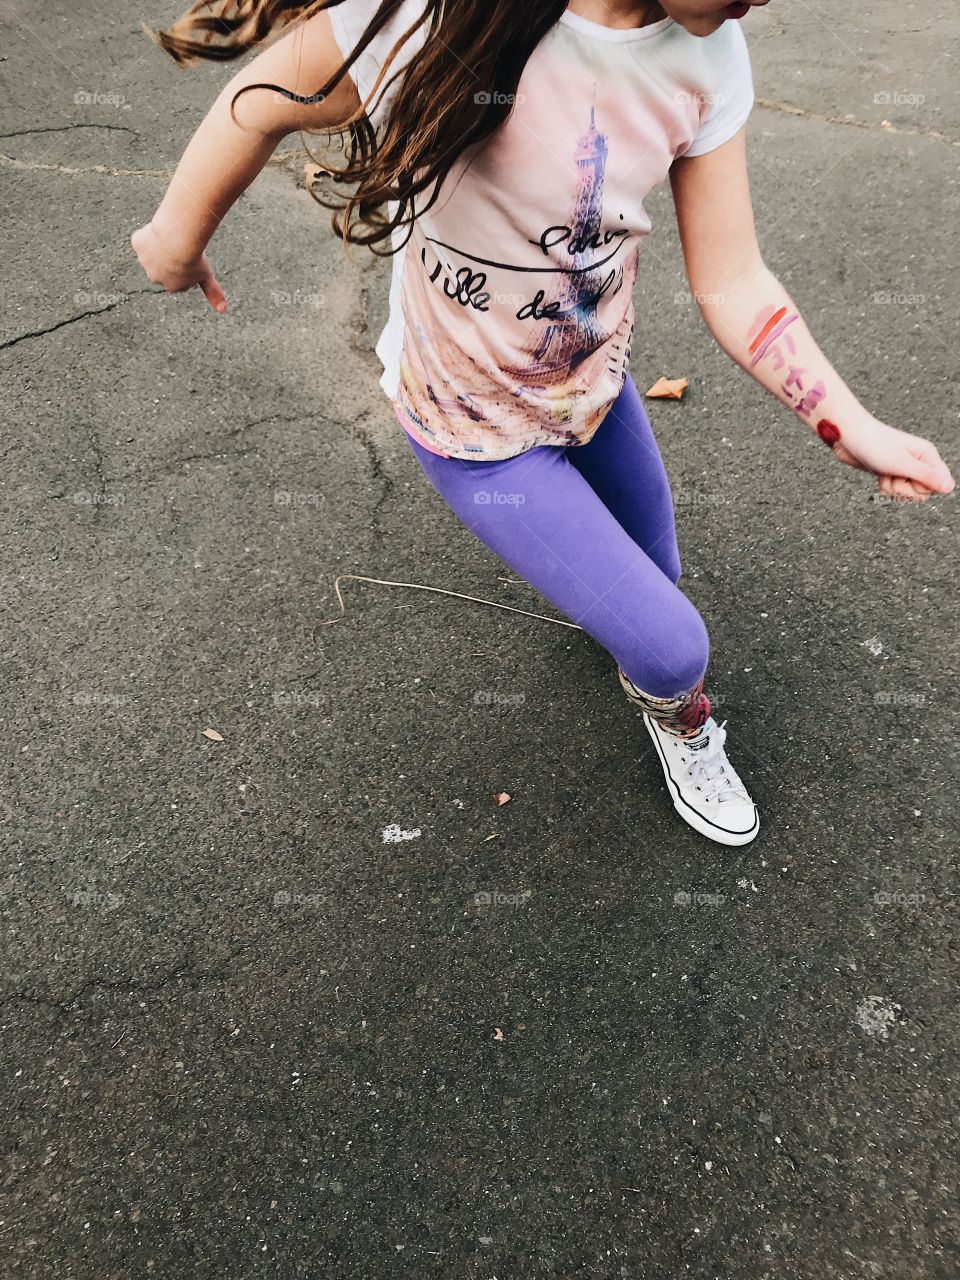 Young girl with bright purple pants and Converse sneakers on dancing in the parking lot and living life. 